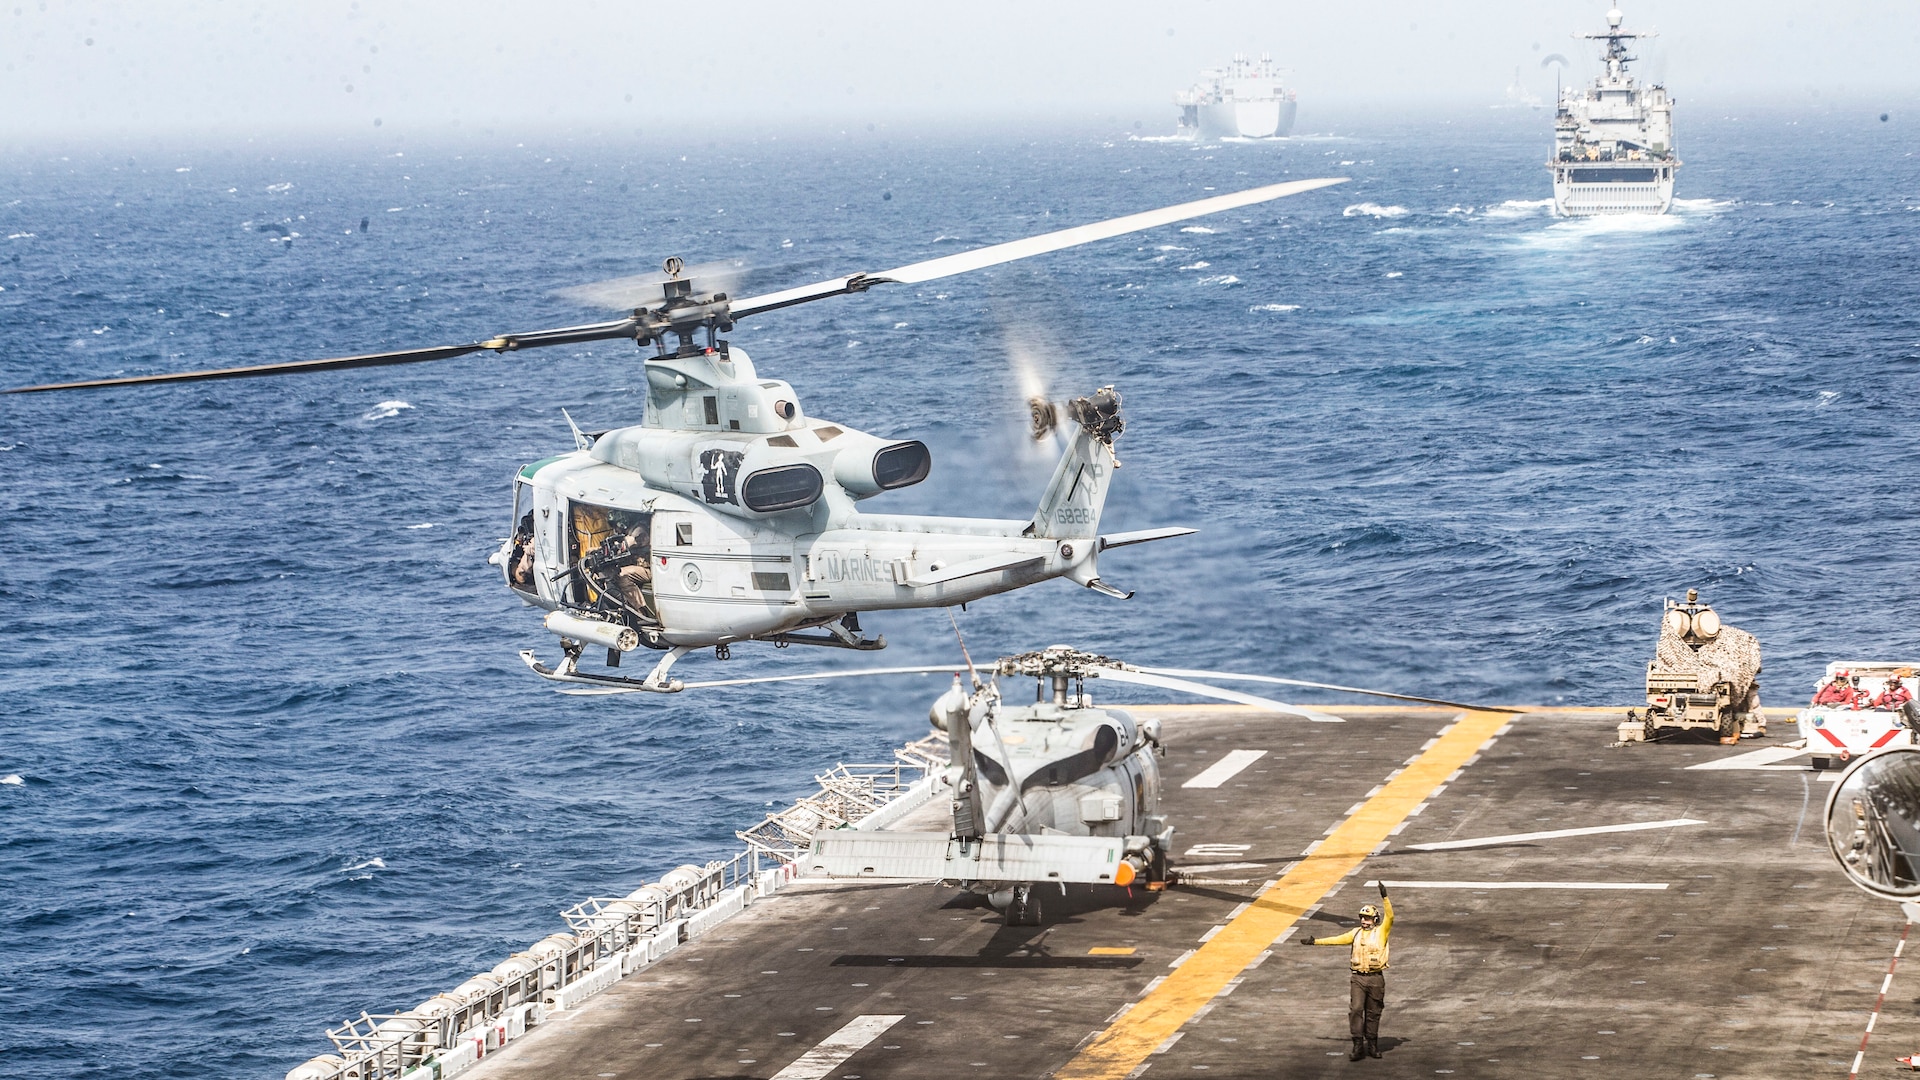 UH-1Y Venom helicopter takes off from flight deck of USS Boxer, Strait of Hormuz, July 18, 2019 (U.S. Marine Corps/Dalton Swanbeck)